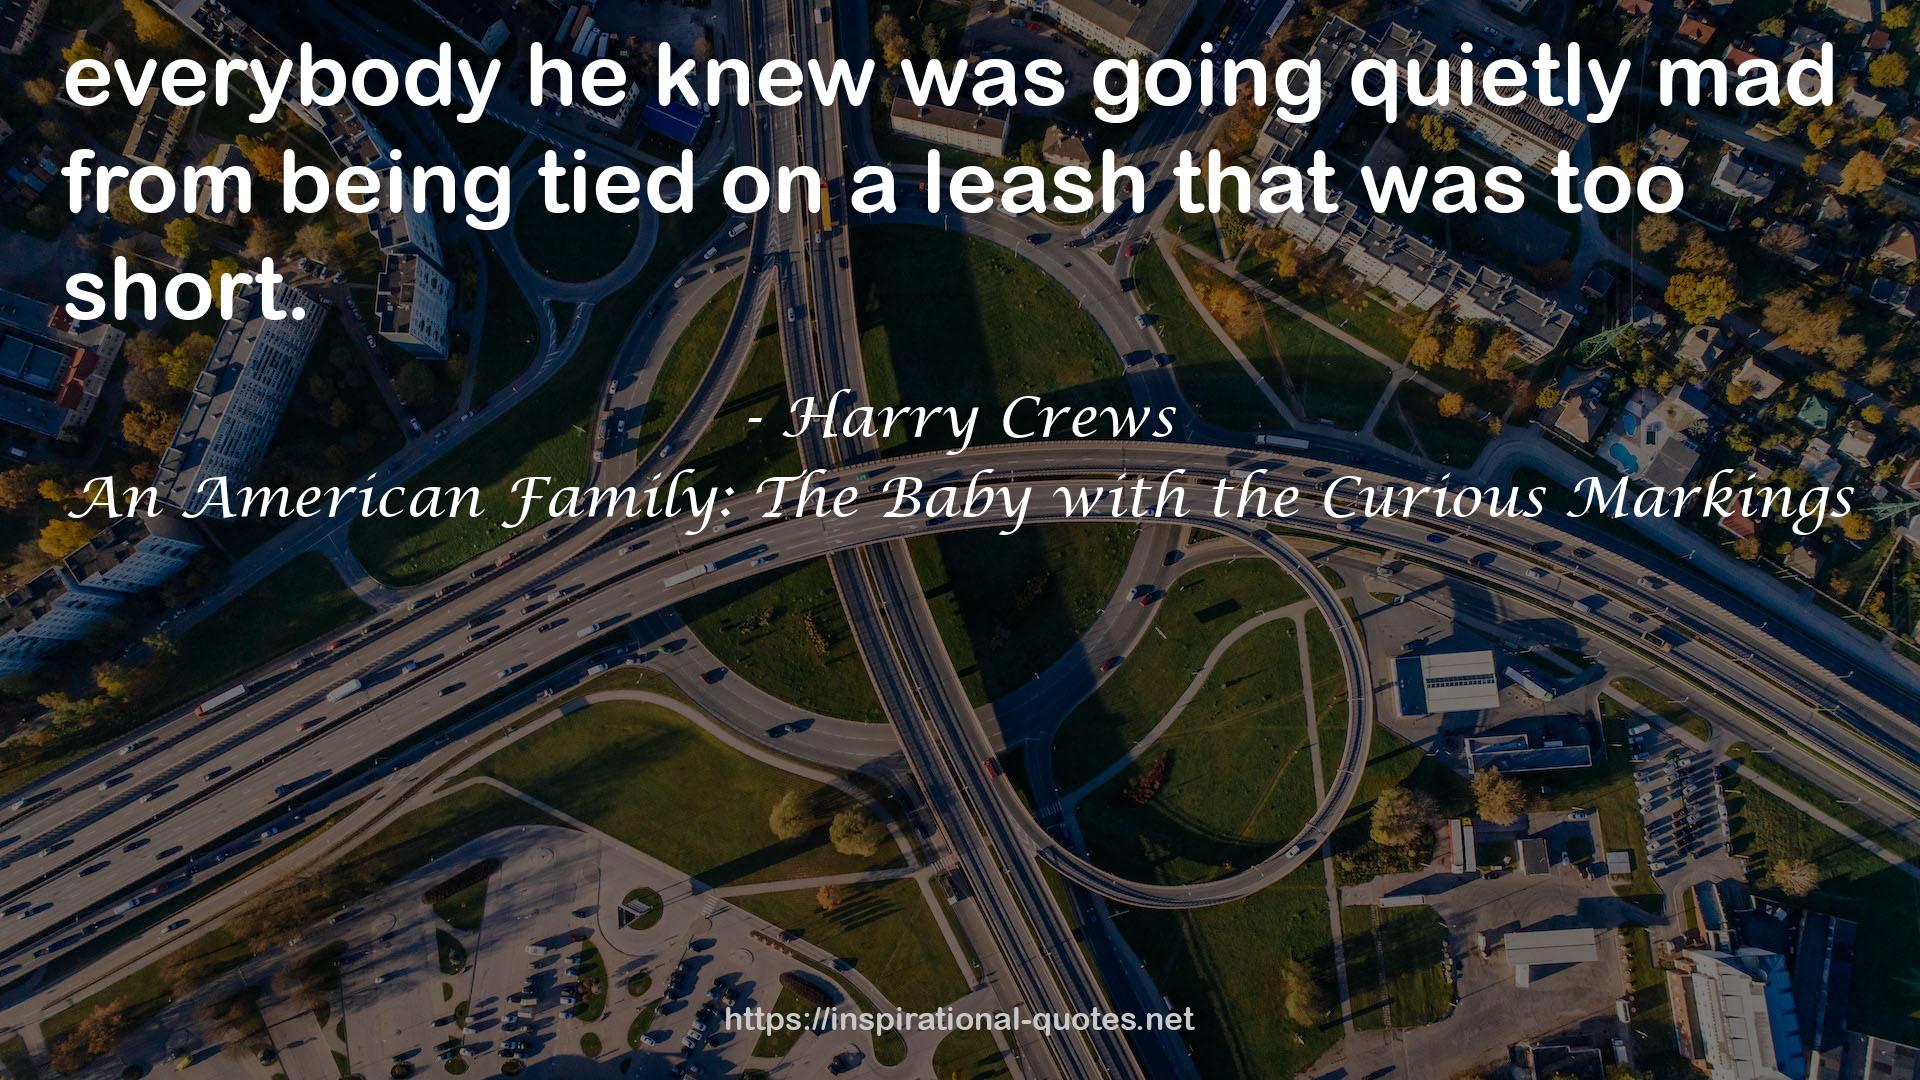 An American Family: The Baby with the Curious Markings QUOTES